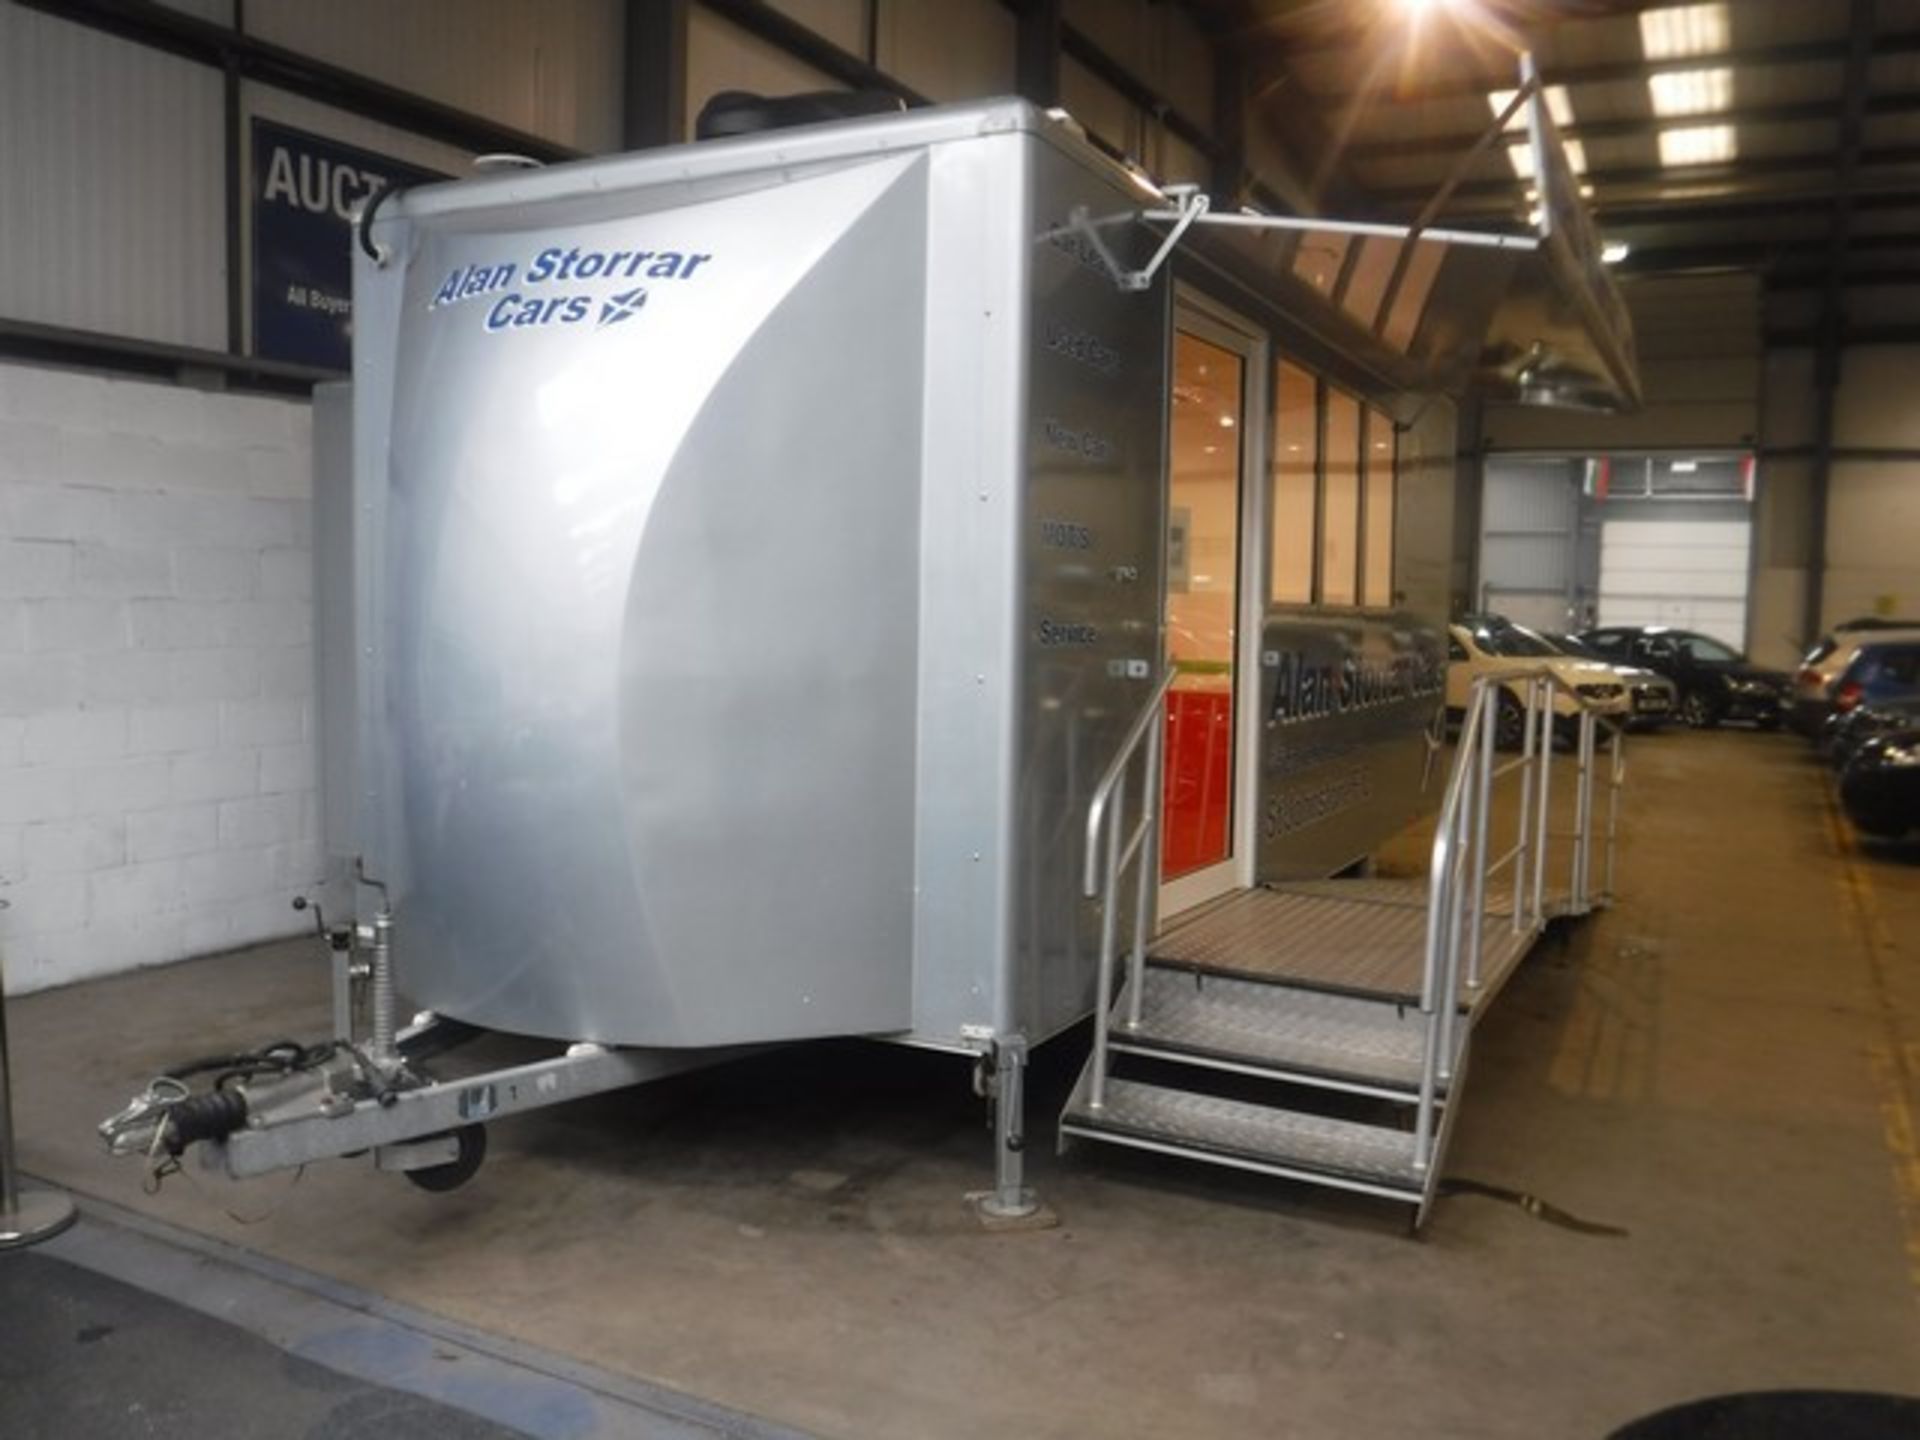 2011 MASTERS hospitality and exhibition tri axle trailer c/w aircon, sat dish, slider side - Image 4 of 14